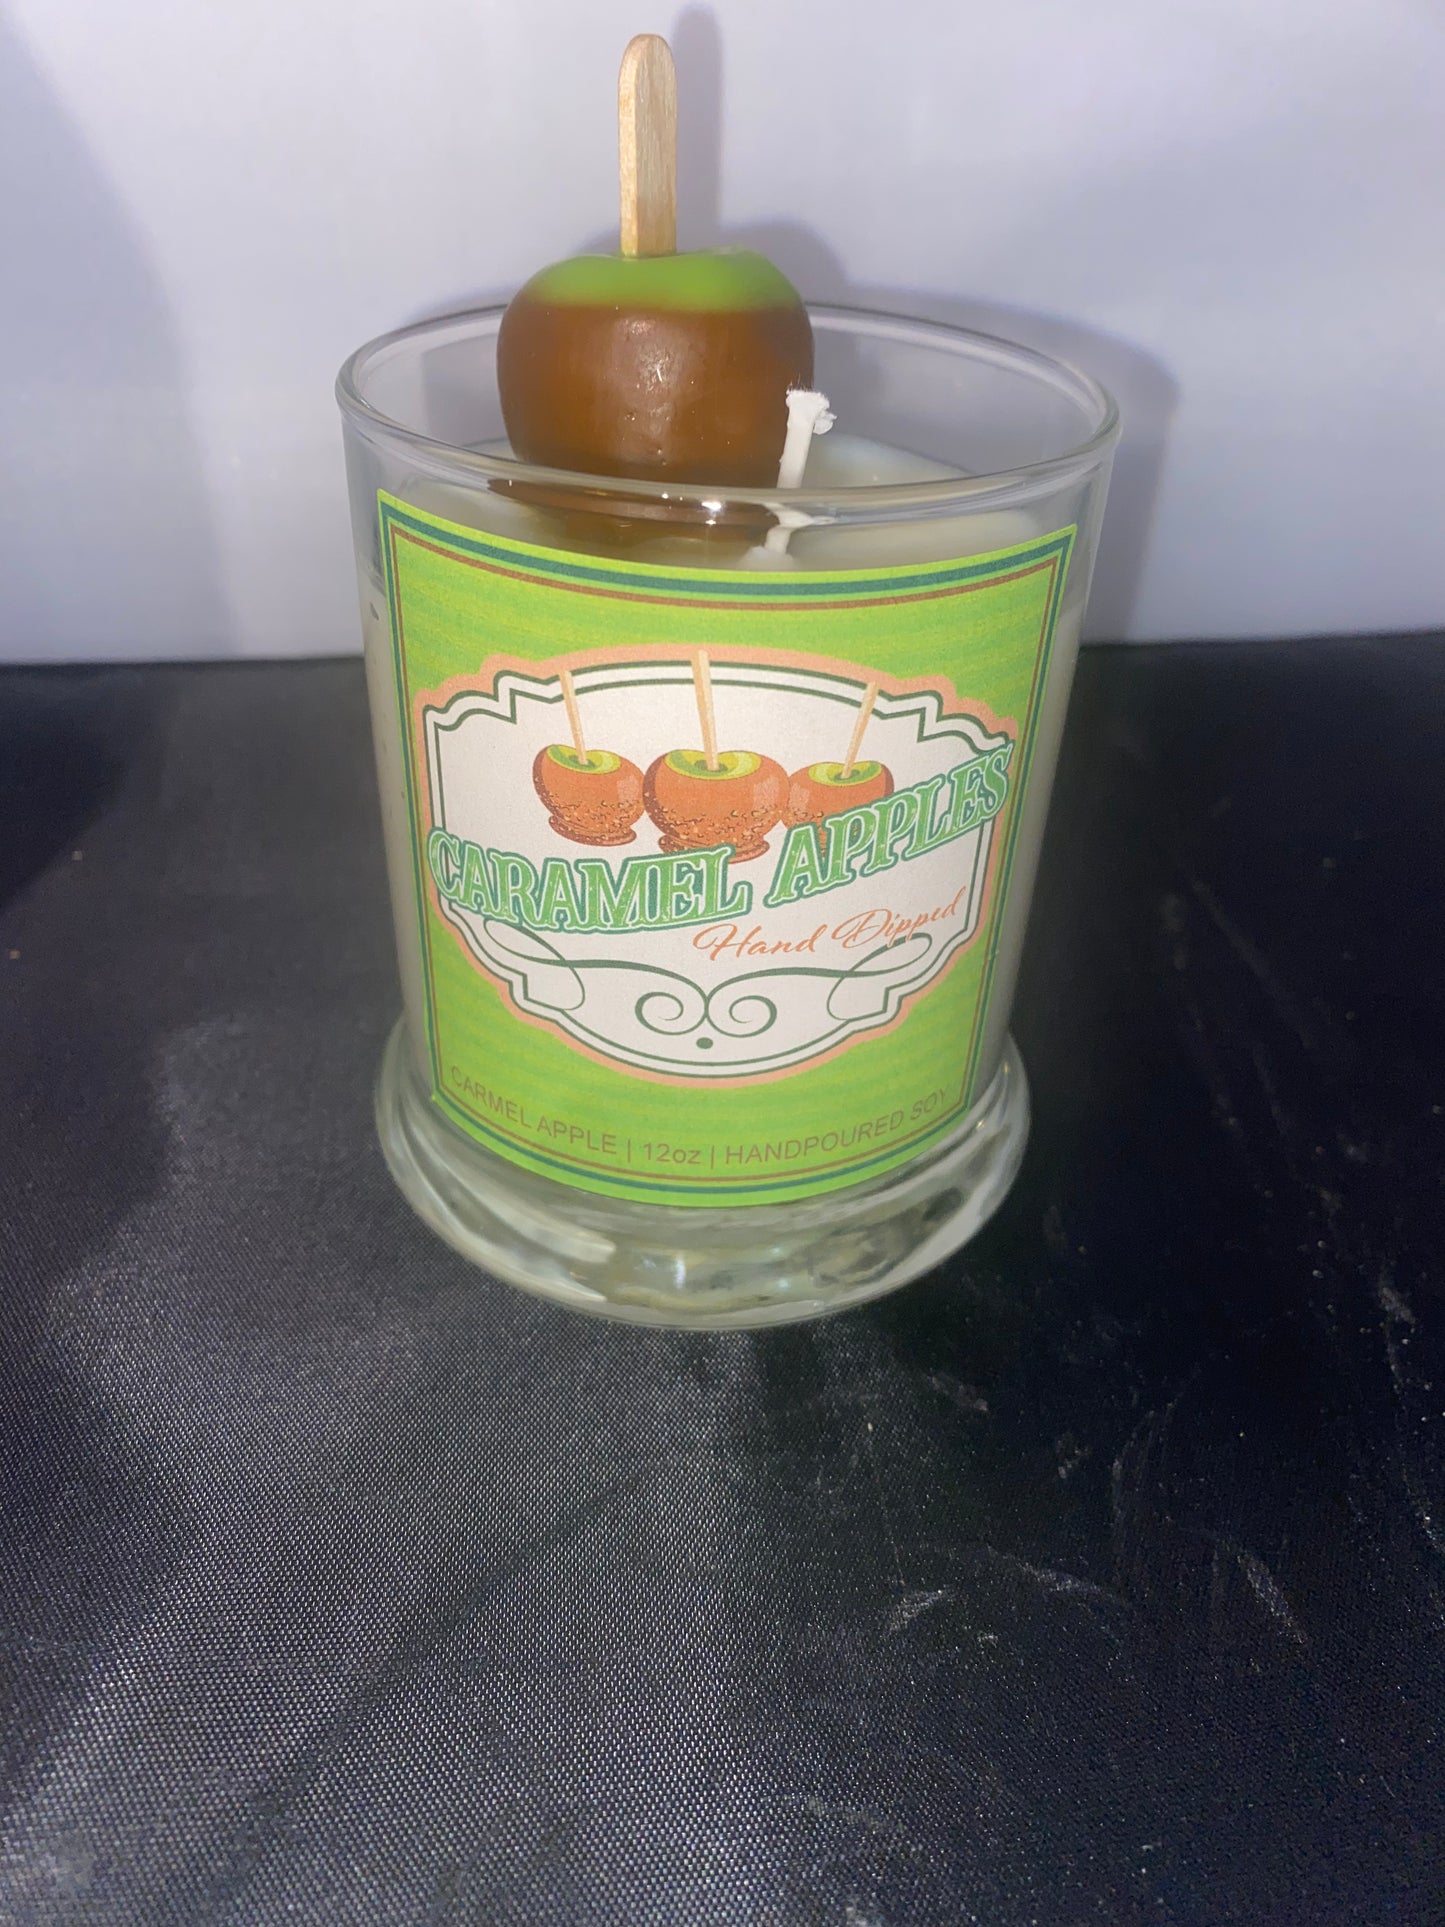 Caramel Apple Scented 12 oz Soy Candle